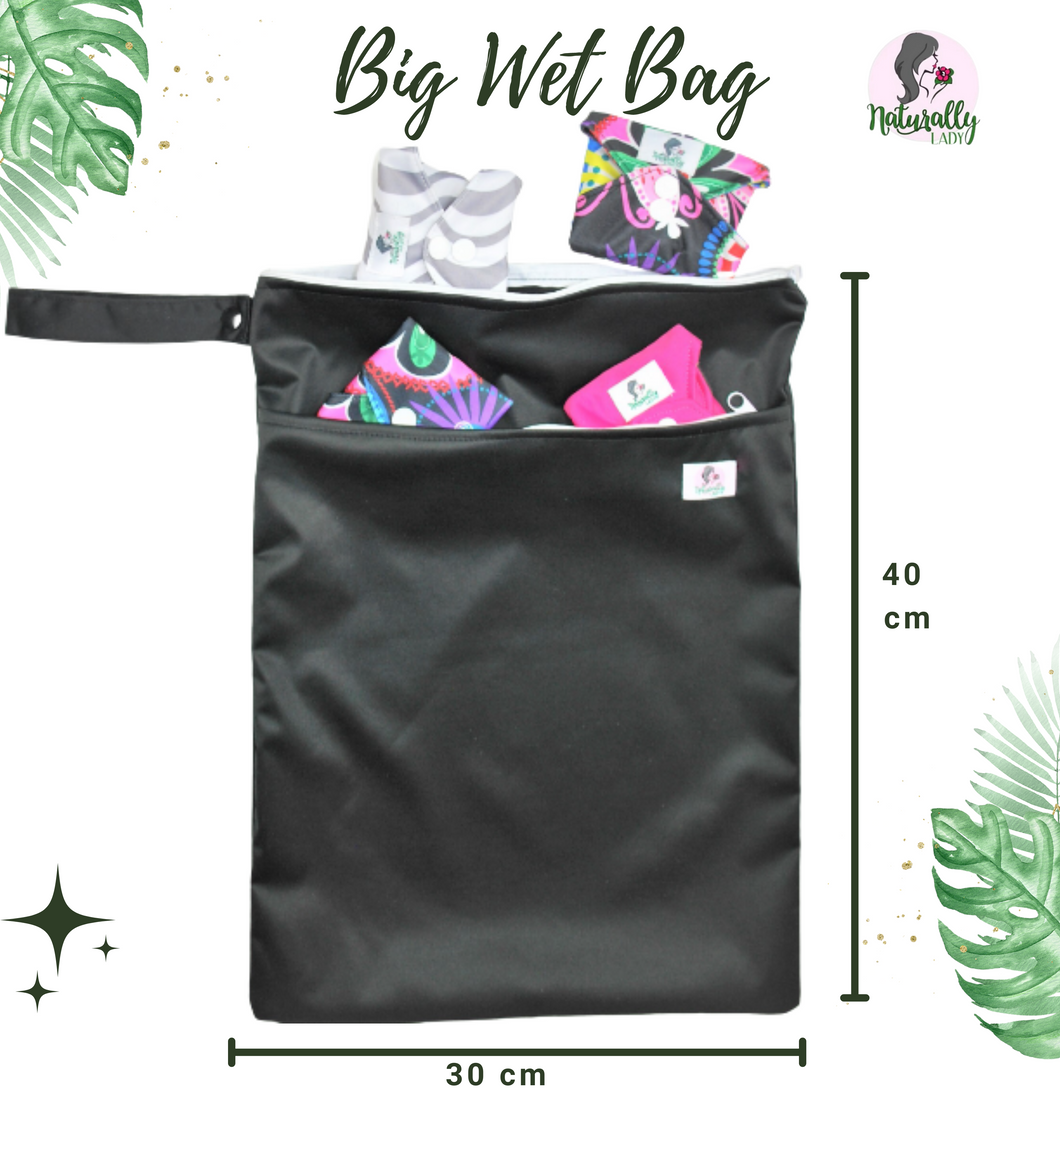 Big Wet Bag 30cm x 40cm for baby nappies |reusable cloth sanitary pads towels | face masks eco zero waste - Double Pockets